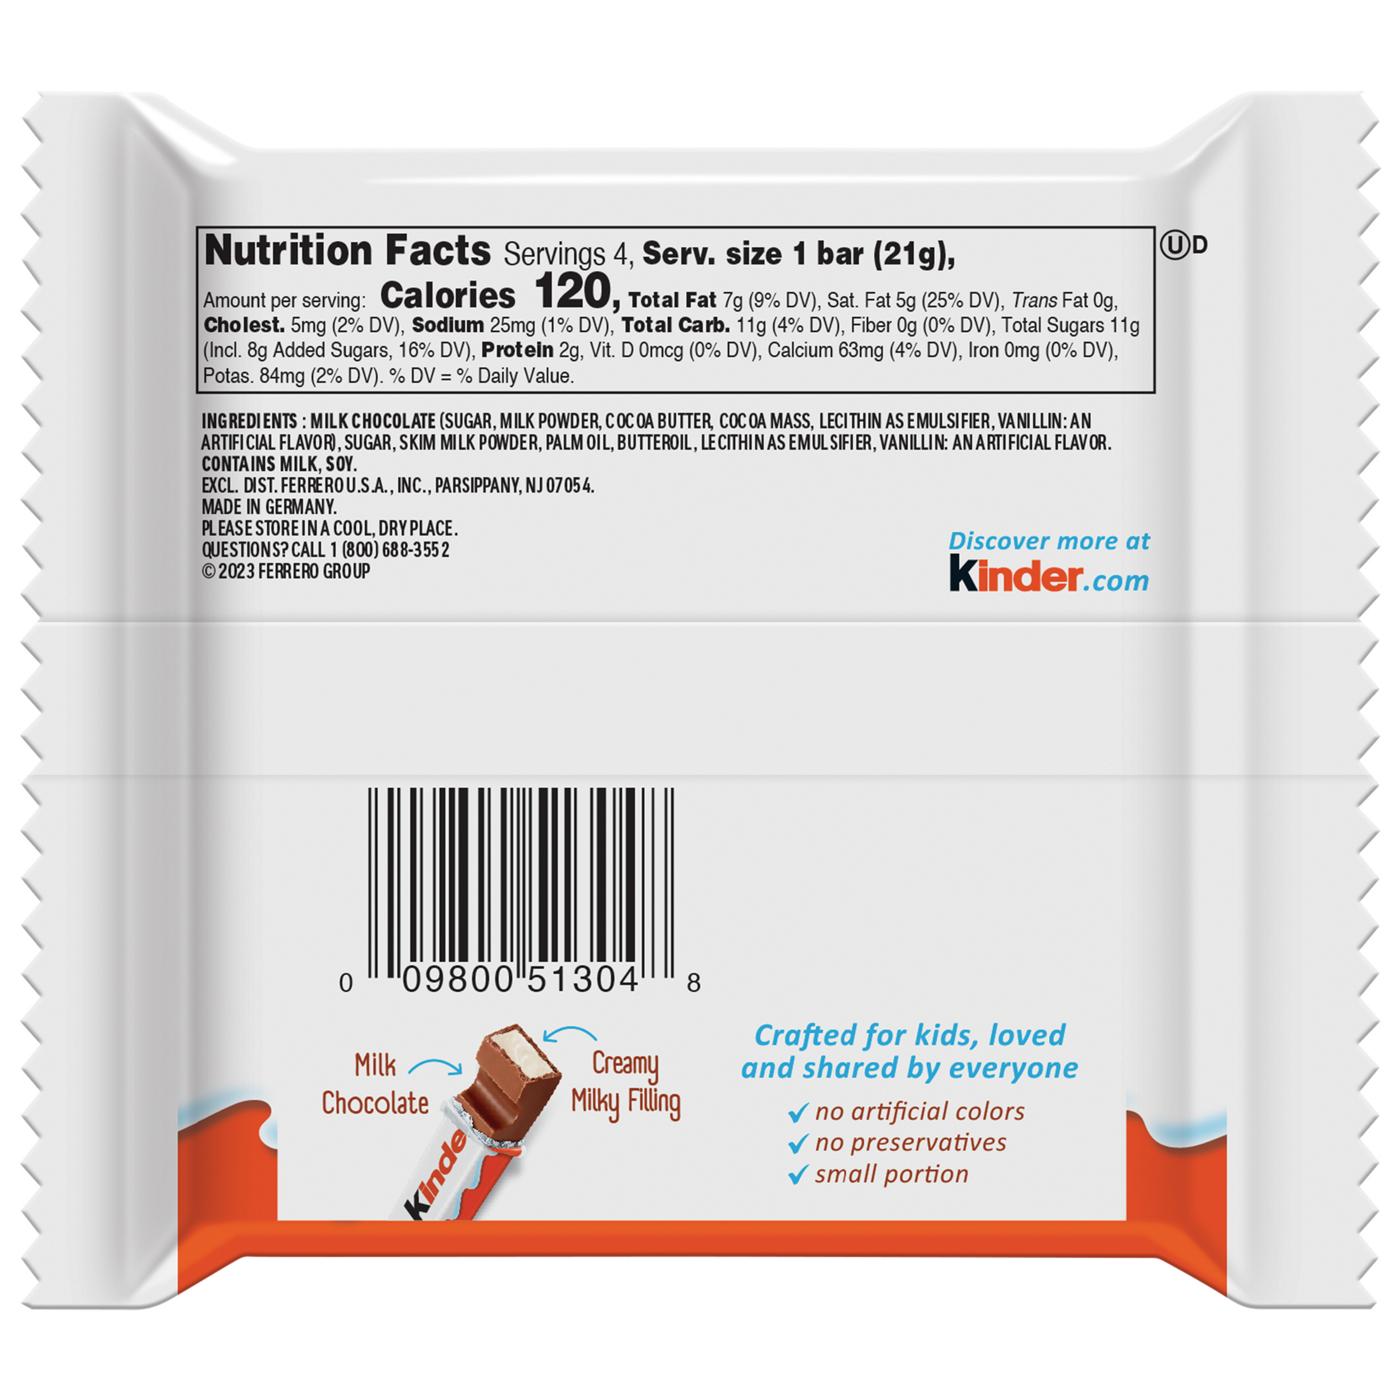 Kinder Chocolate with Creamy Milky Filling Candy Bars - King Size; image 4 of 5